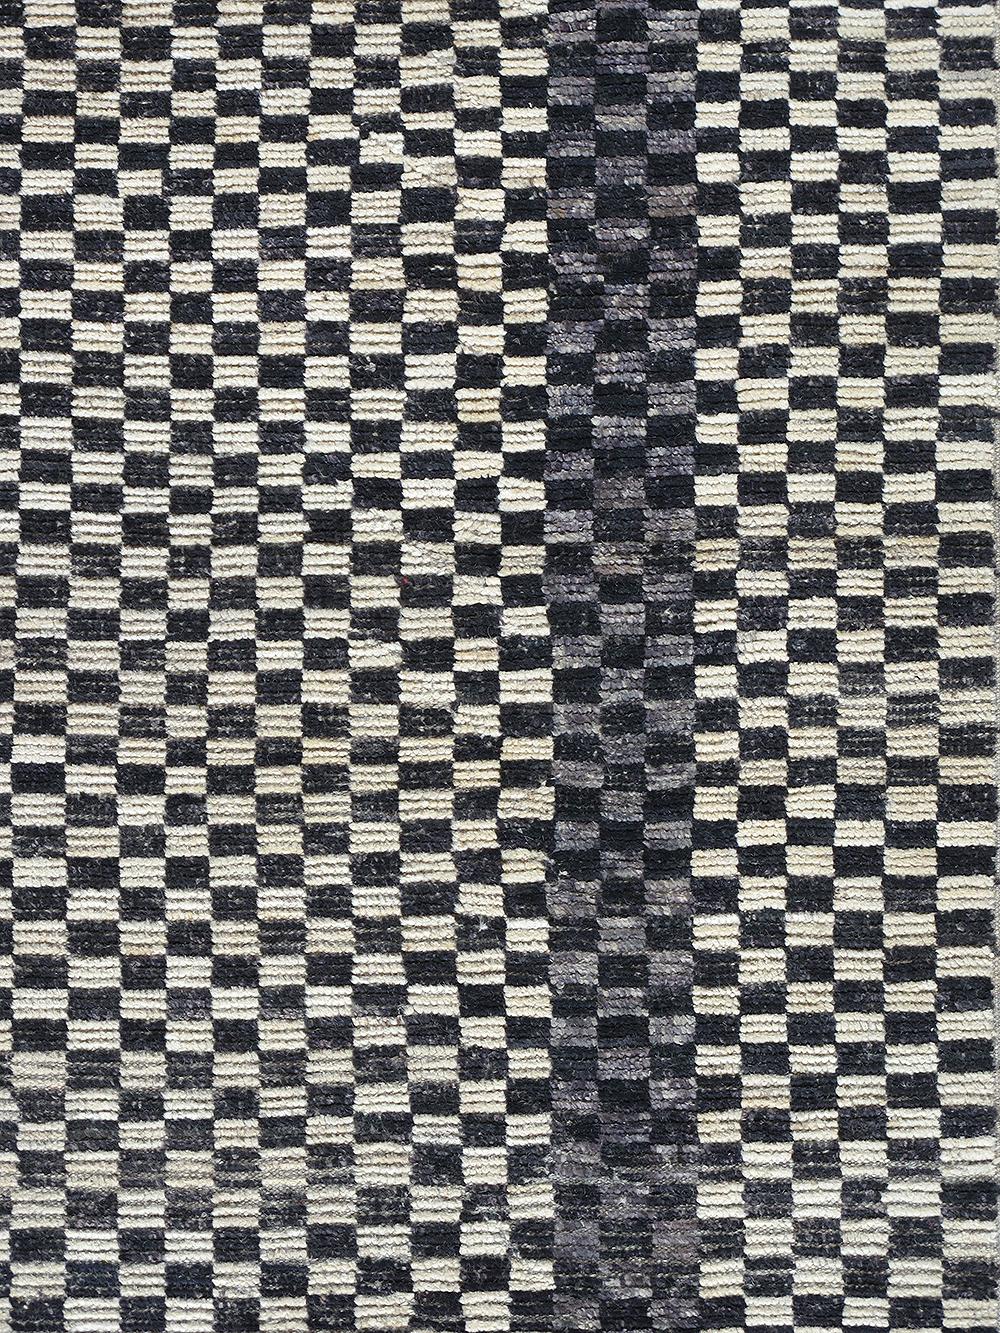 Our checkered runner is handknotted from the finest hand-carded, hand spun, naturally dyed wool. This modern style can be customized and made in specific colors and sizes.